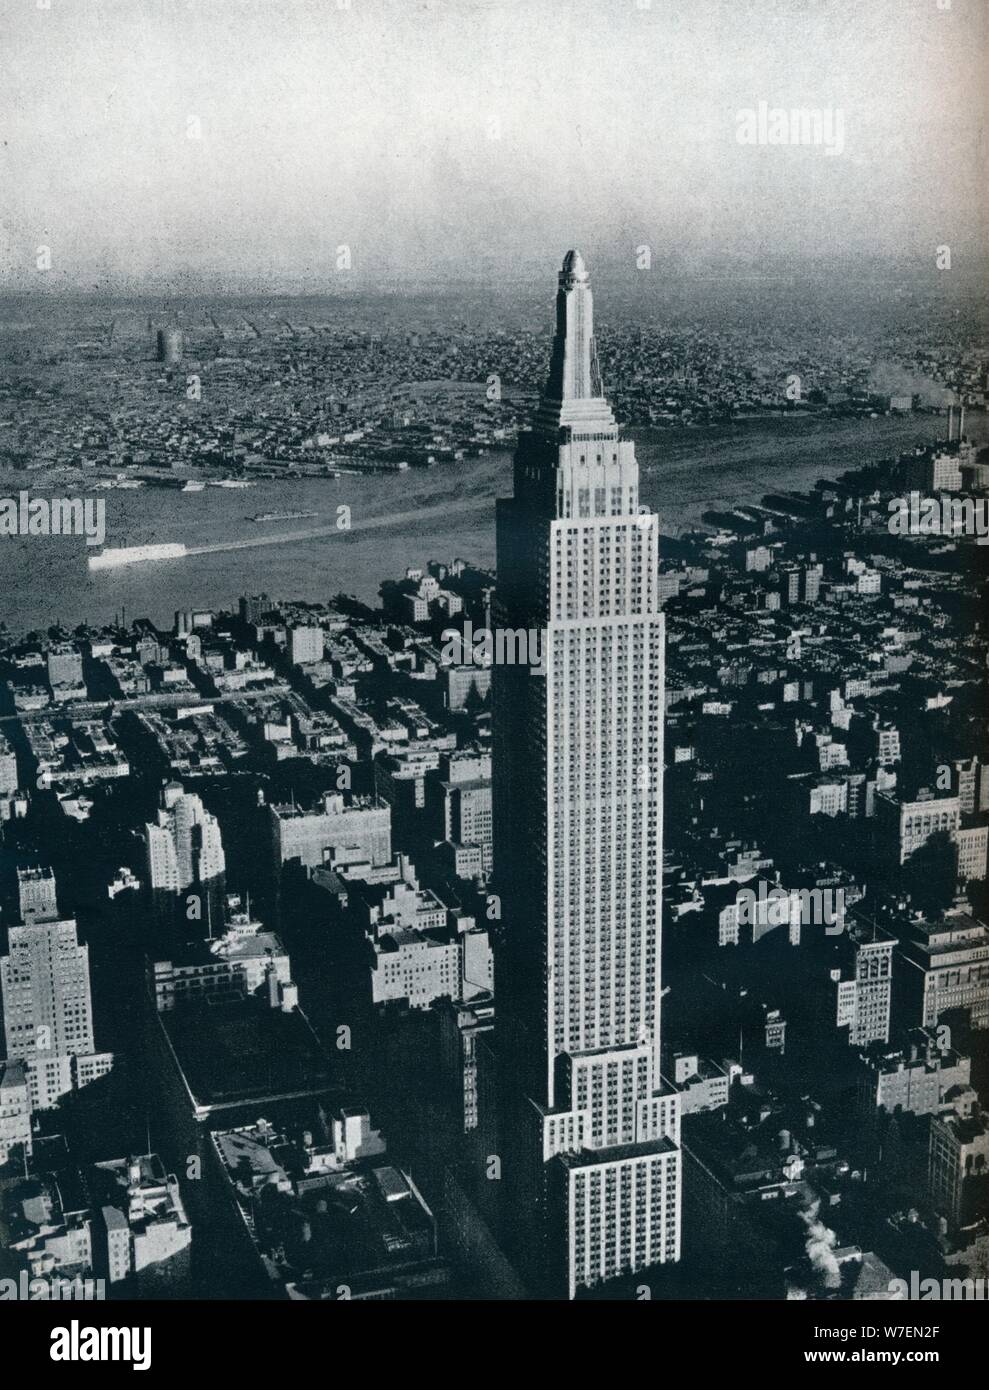 'A superb photograph of the World's tallest building, the Empire State, New York City', c1940. Artist: Sherman Mills Fairchild. Stock Photo